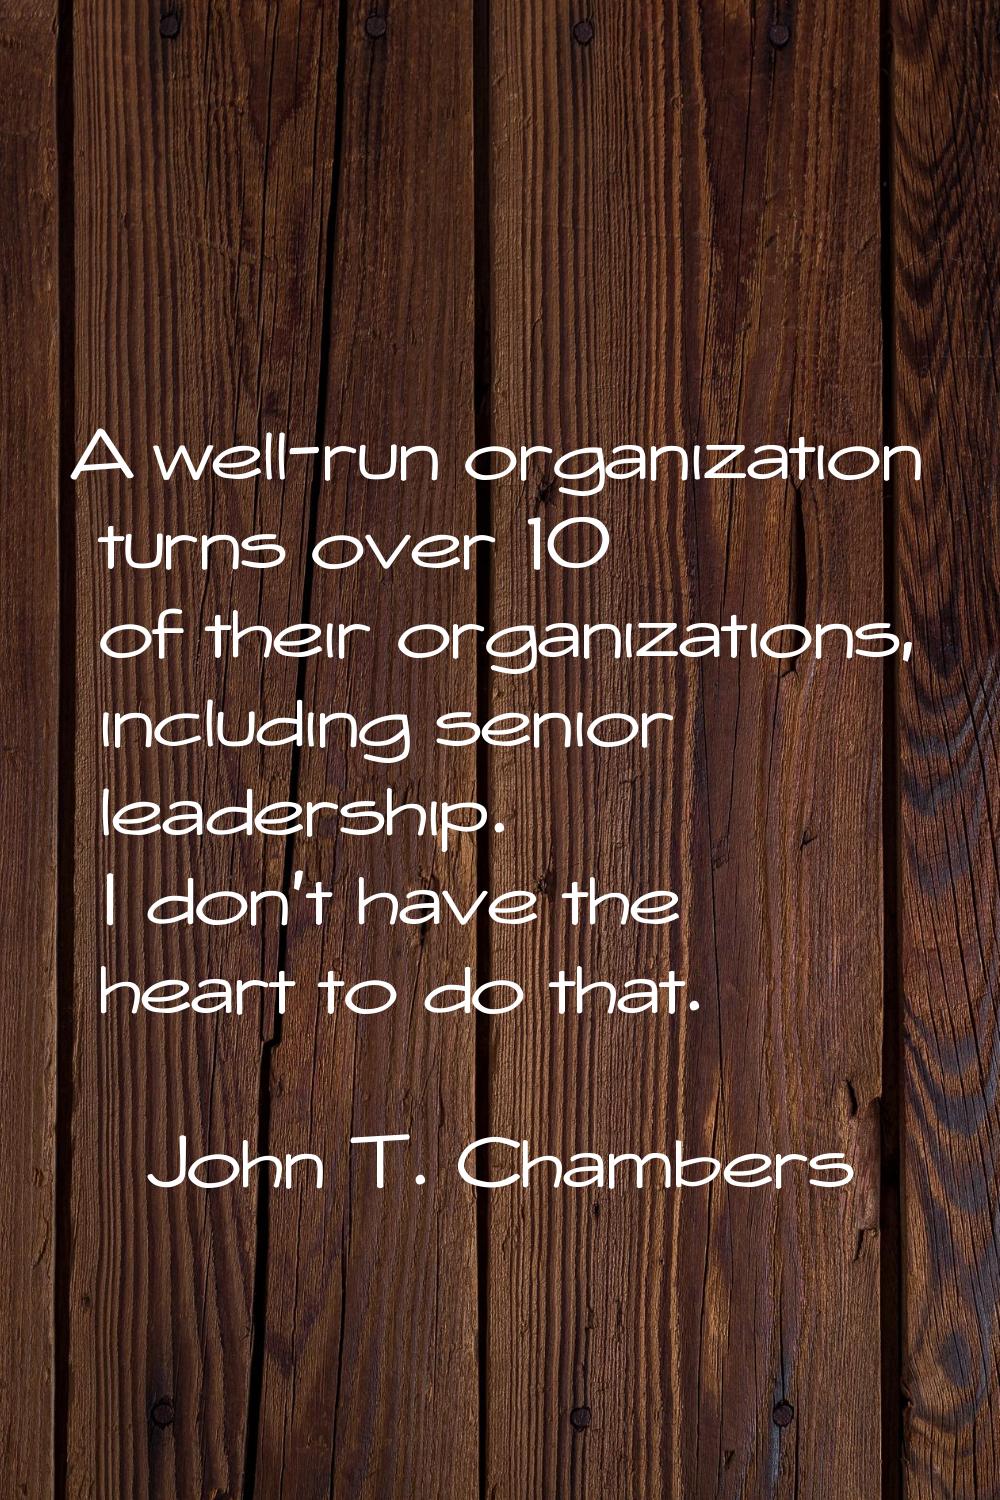 A well-run organization turns over 10% of their organizations, including senior leadership. I don't